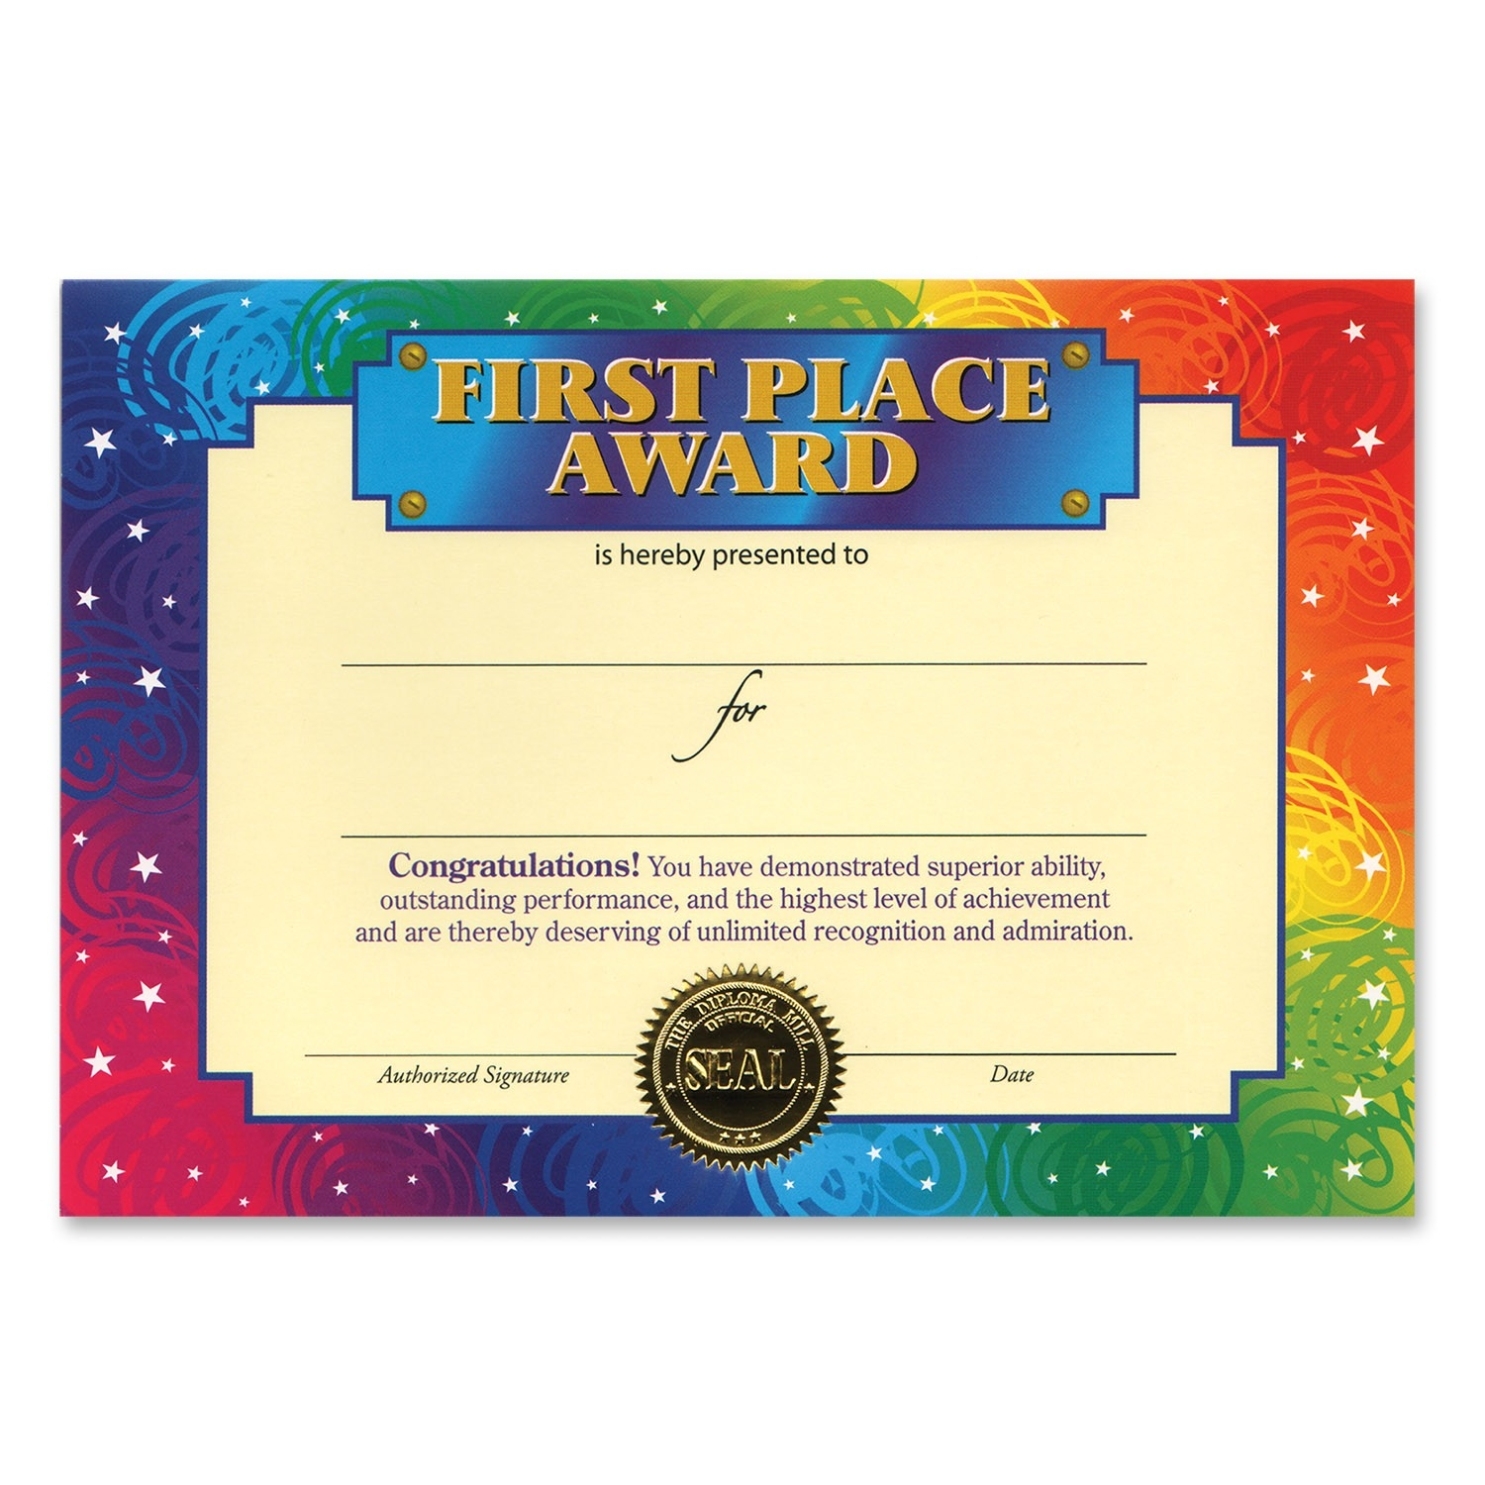 First Place Award Certificate - Carlynstudio for First Place Award Certificate Template